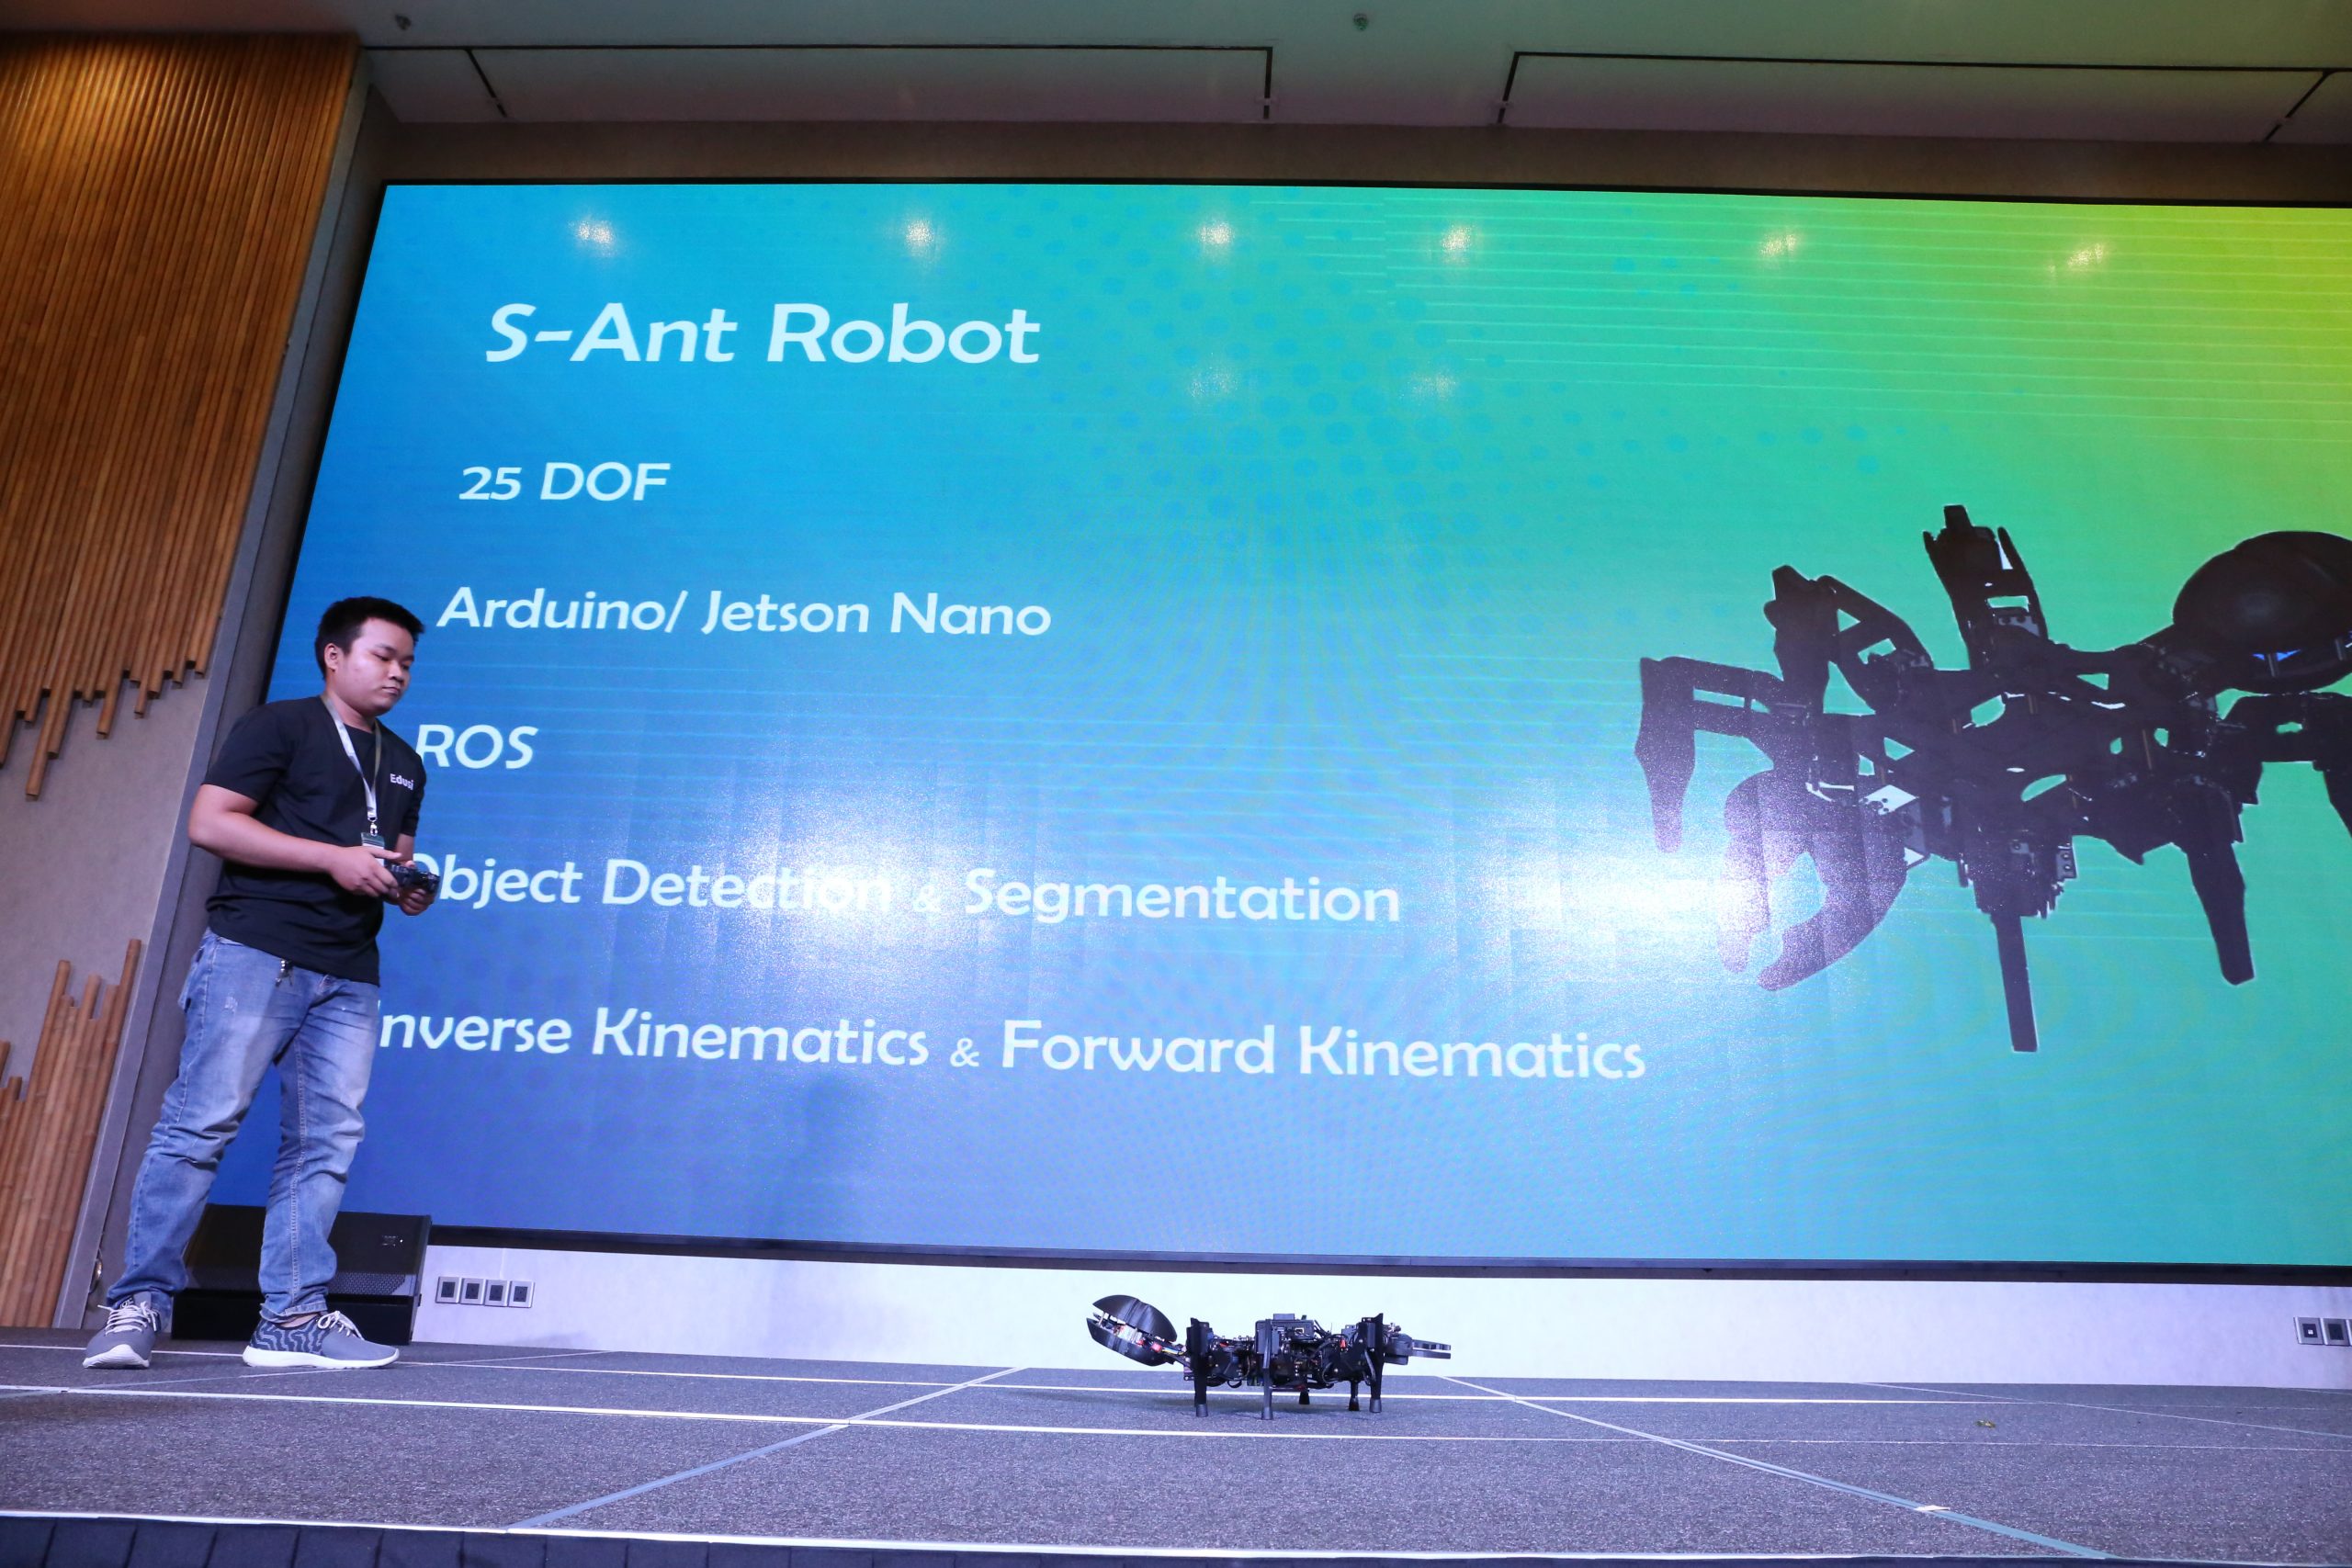 Phuong Hoang on stage with their S Ant 2 robot